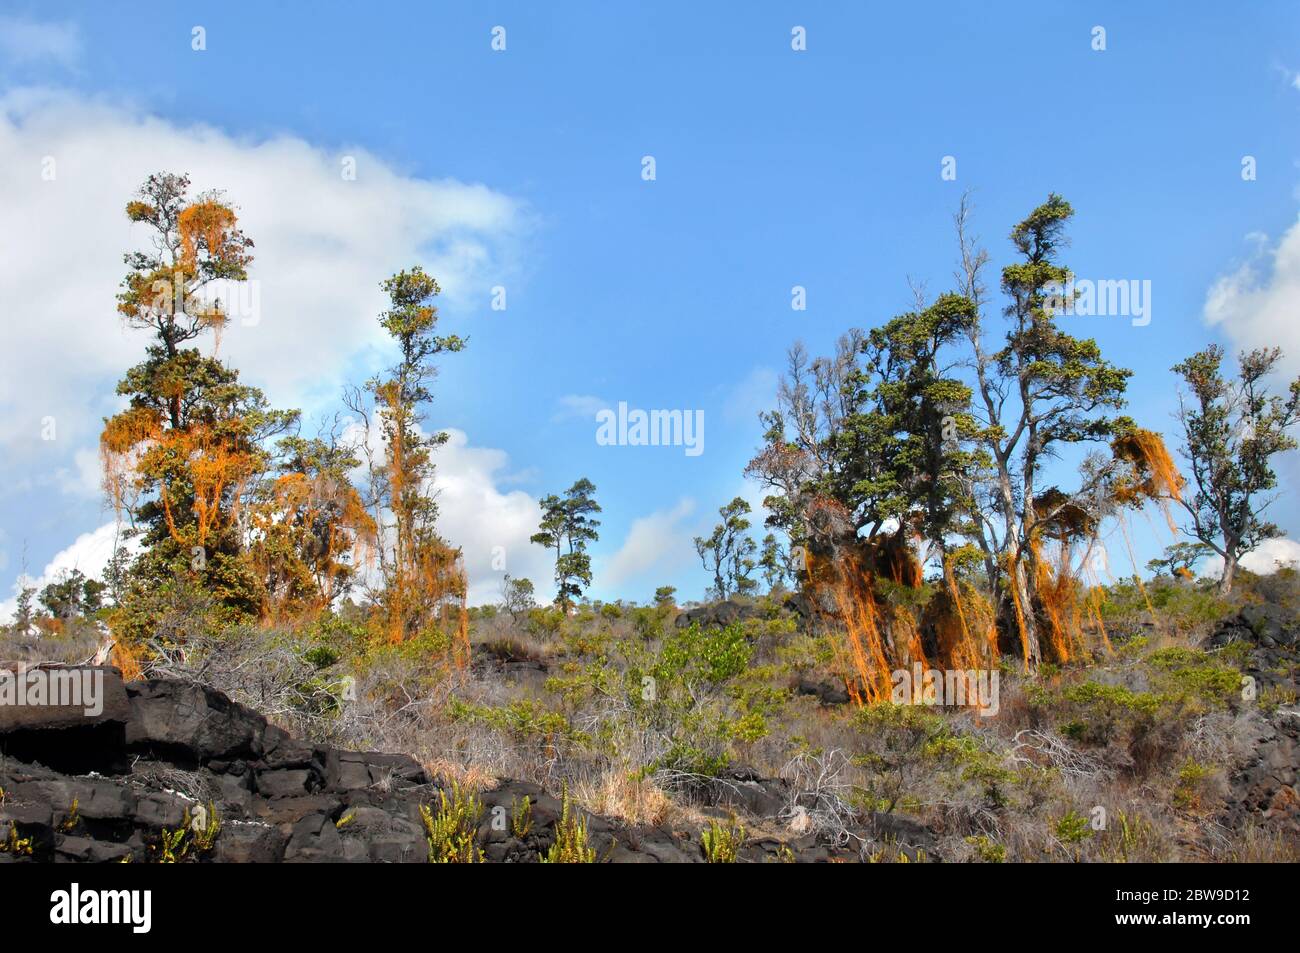 Fascinating stringy, parasitic vine covers trees in the Hawaii Volcanoes National Park.  Ohi'a trees struggle to survive its clutches. Stock Photo